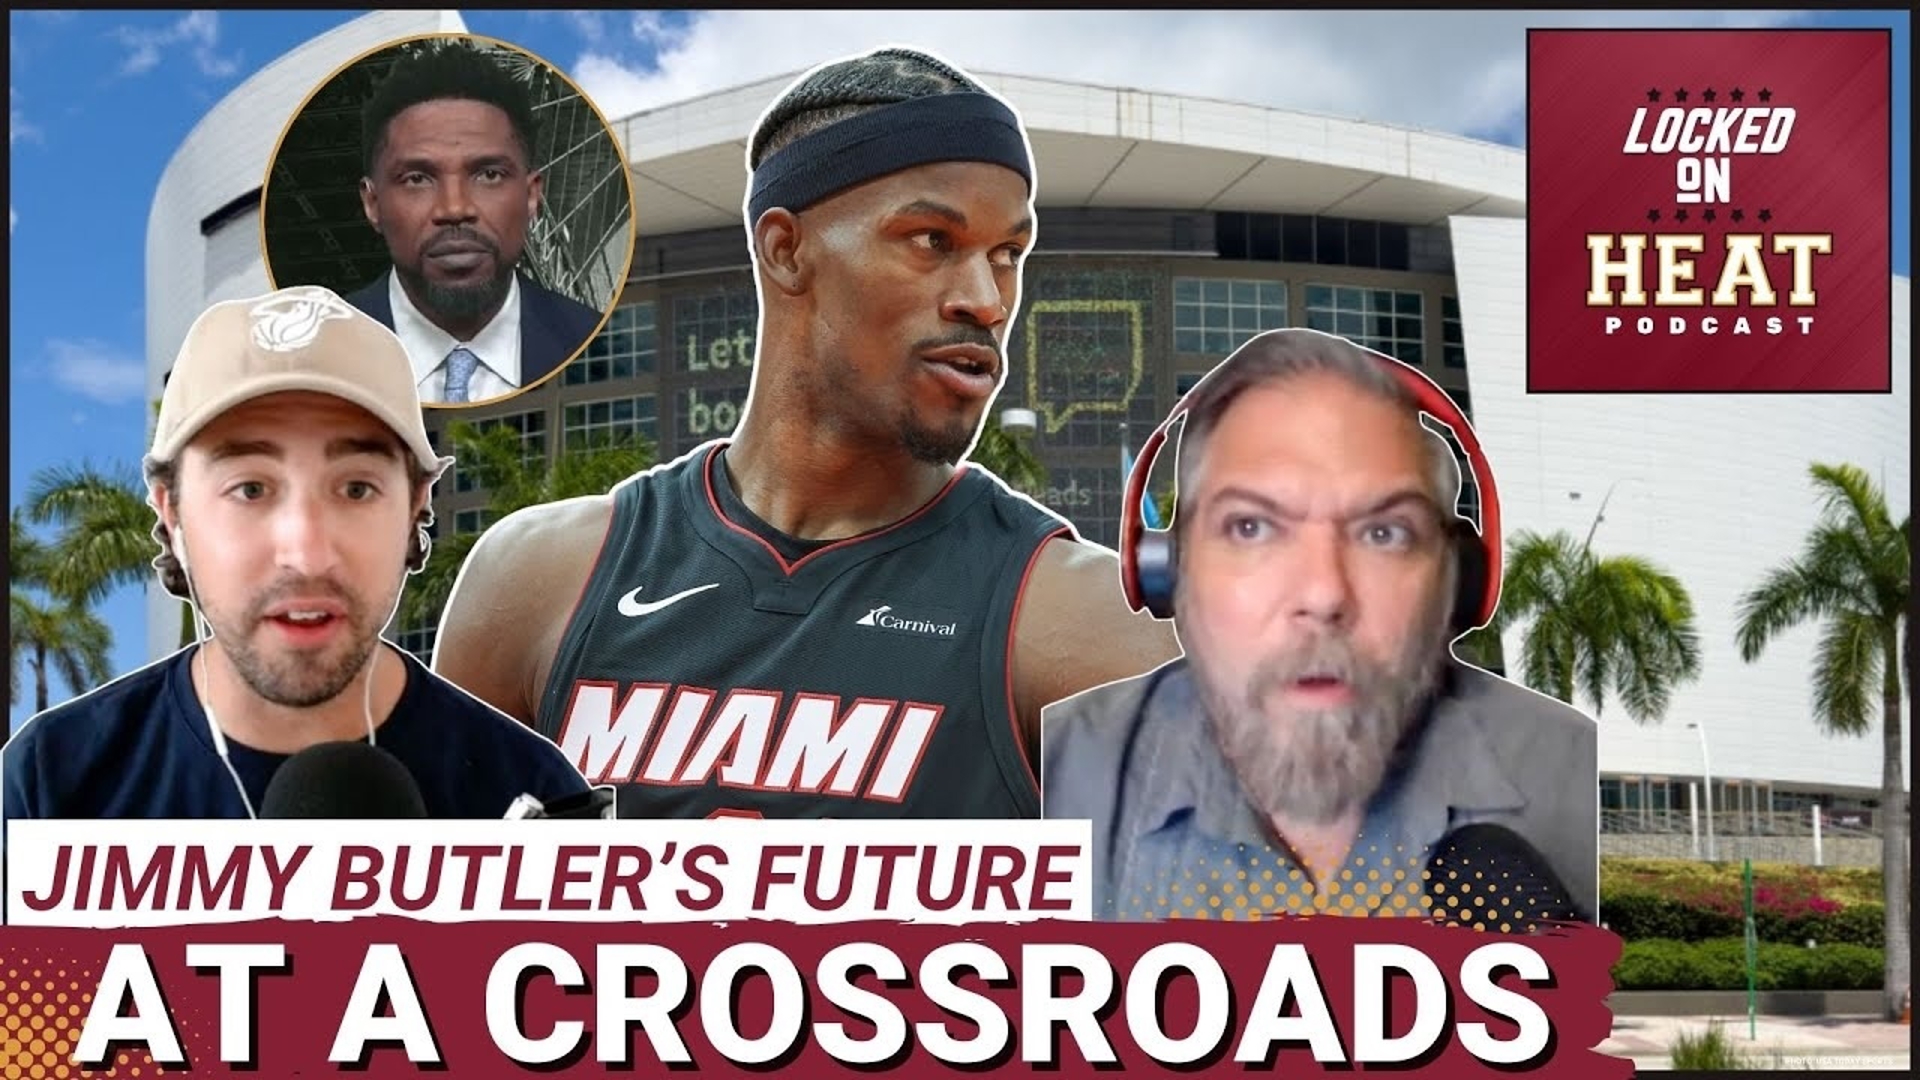 The Miami Heat and Jimmy Butler are entering a pivotal offseason that will decide their futures of Butler and the organization.